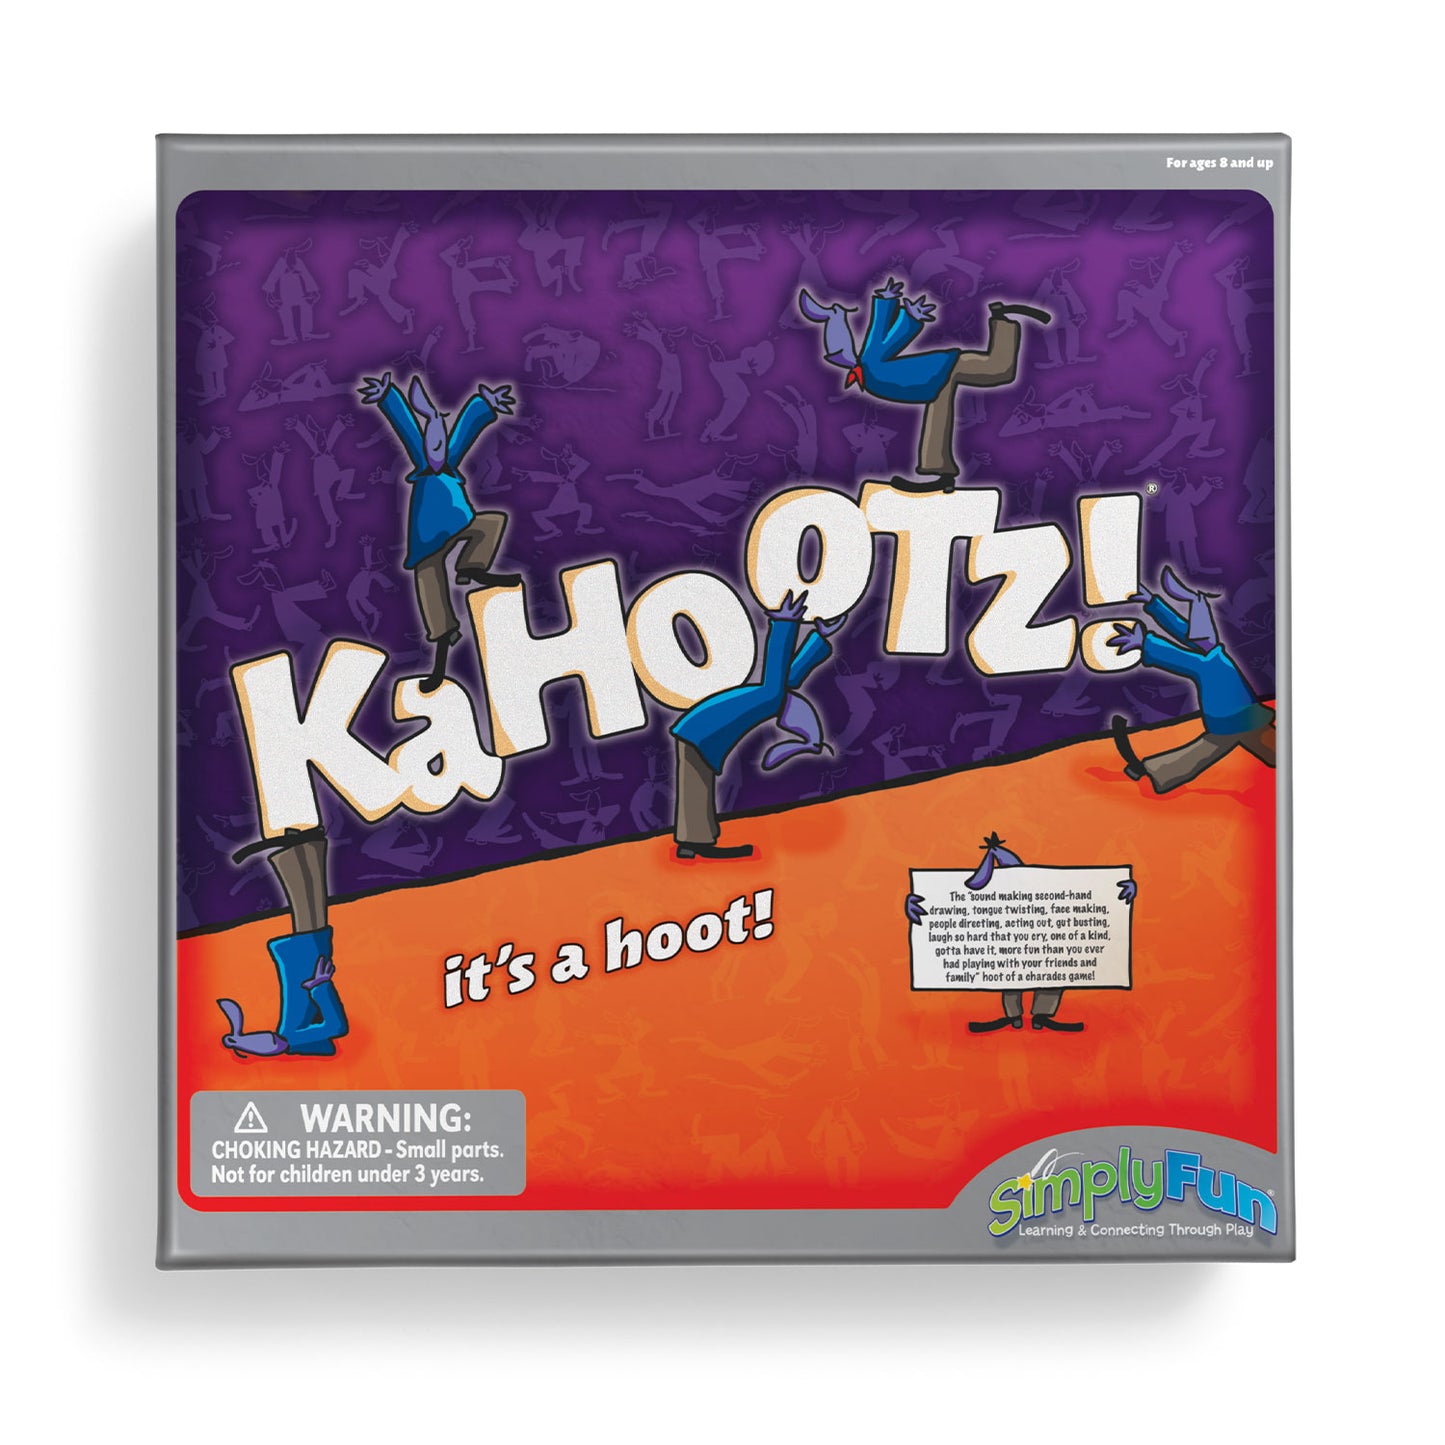 Kahoot!+ makes learning and fun with family and friends easier